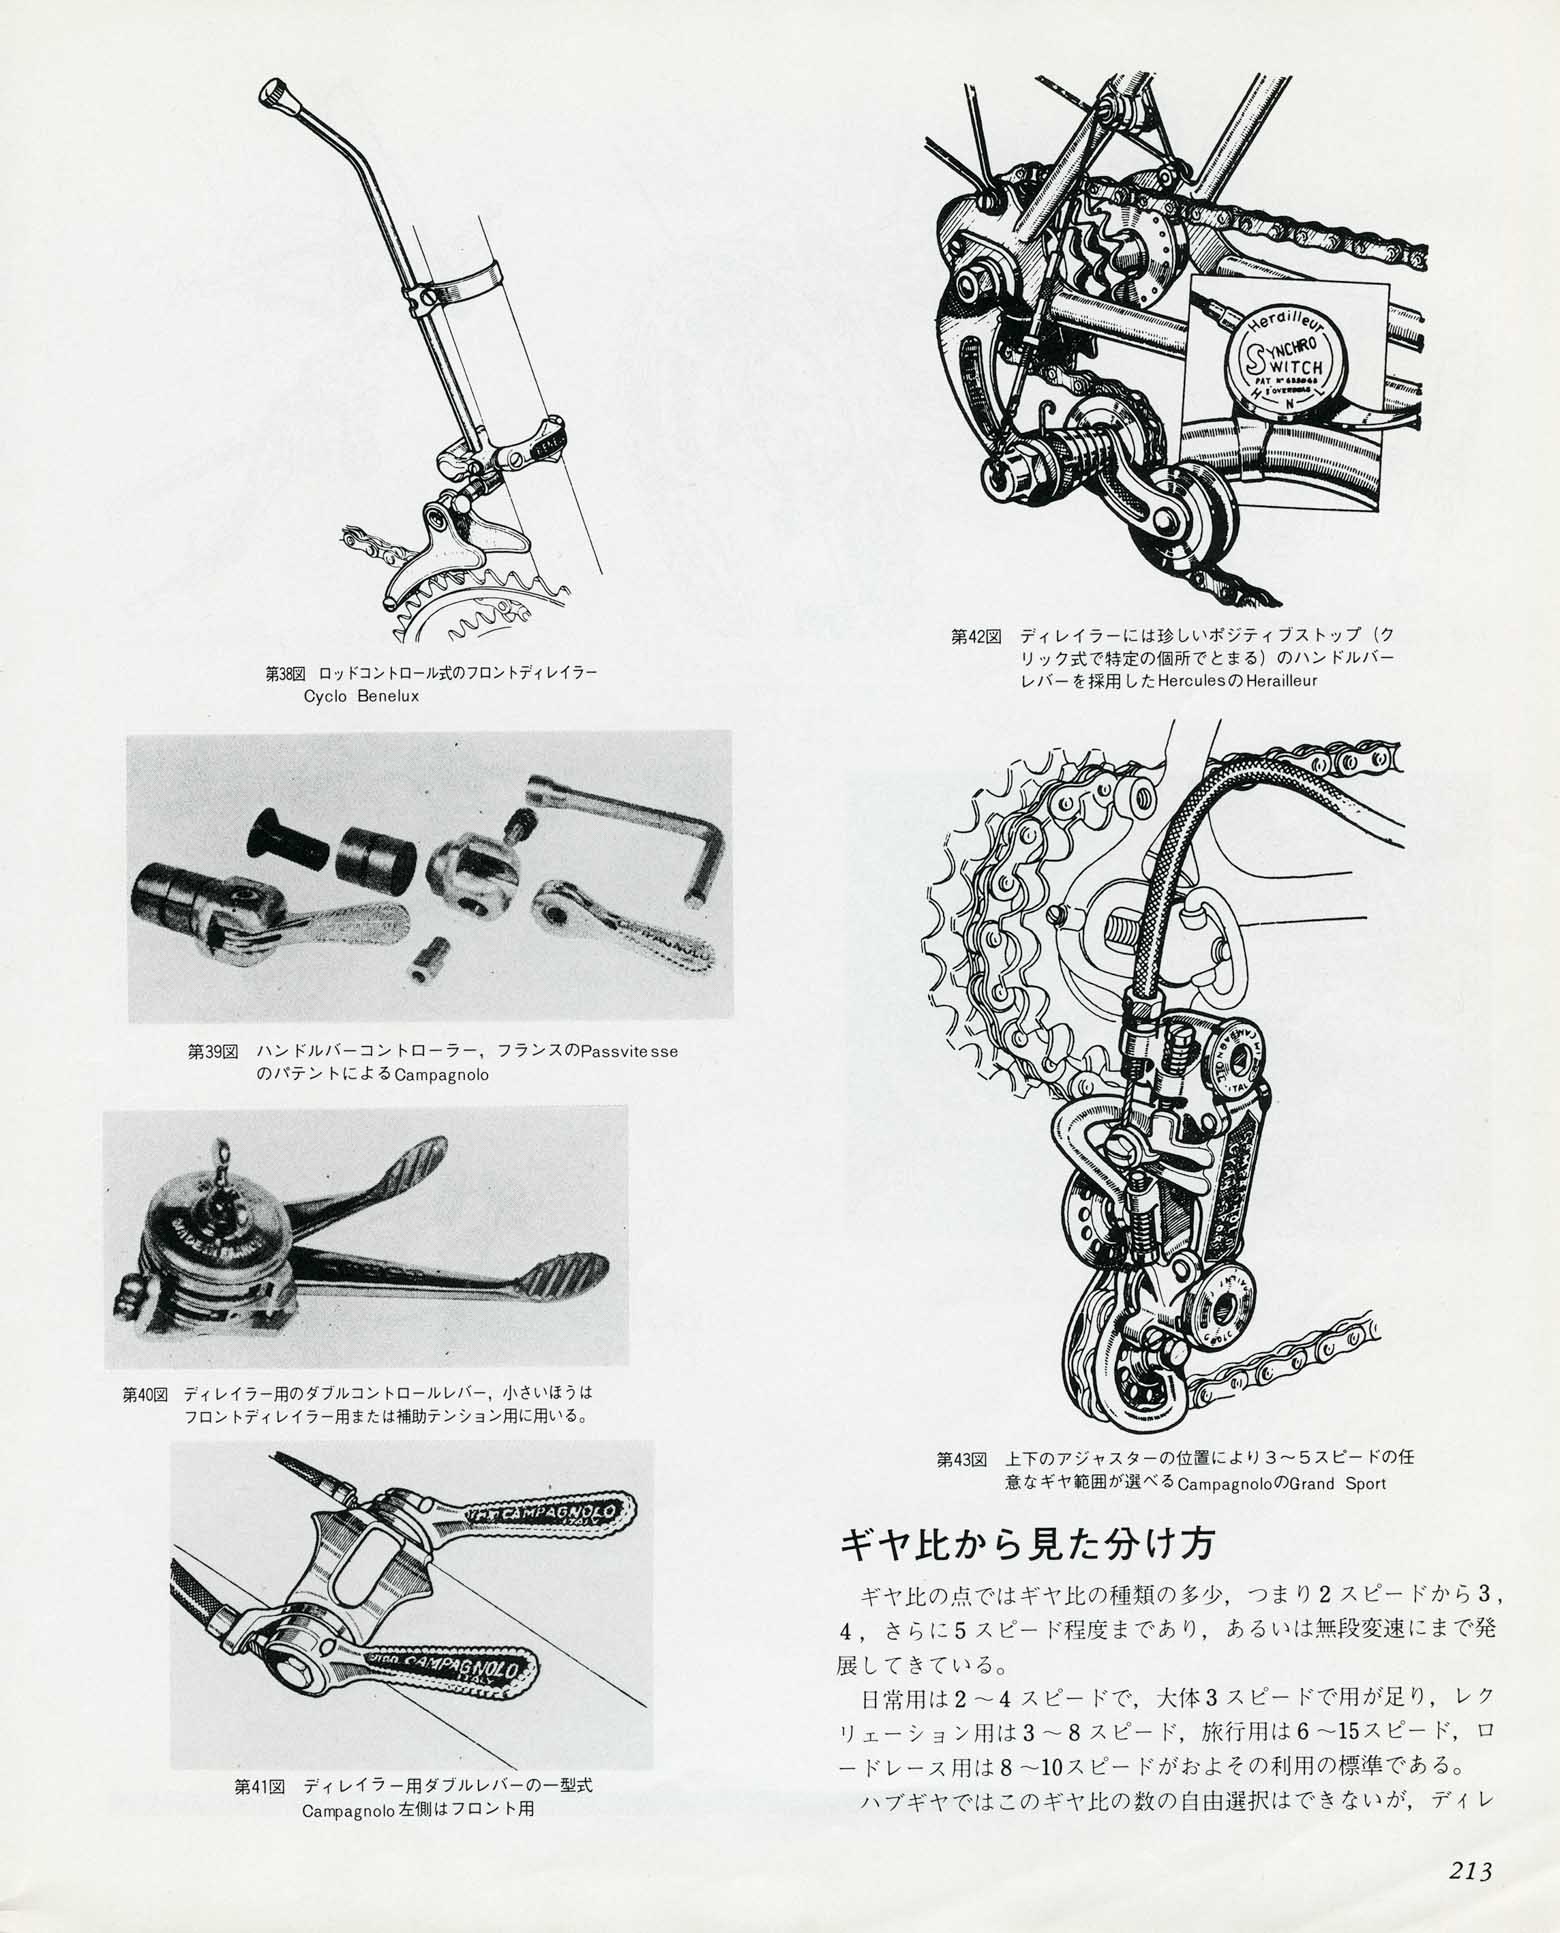 New Cycling May 1981 - Derailleur Collection page 213 main image